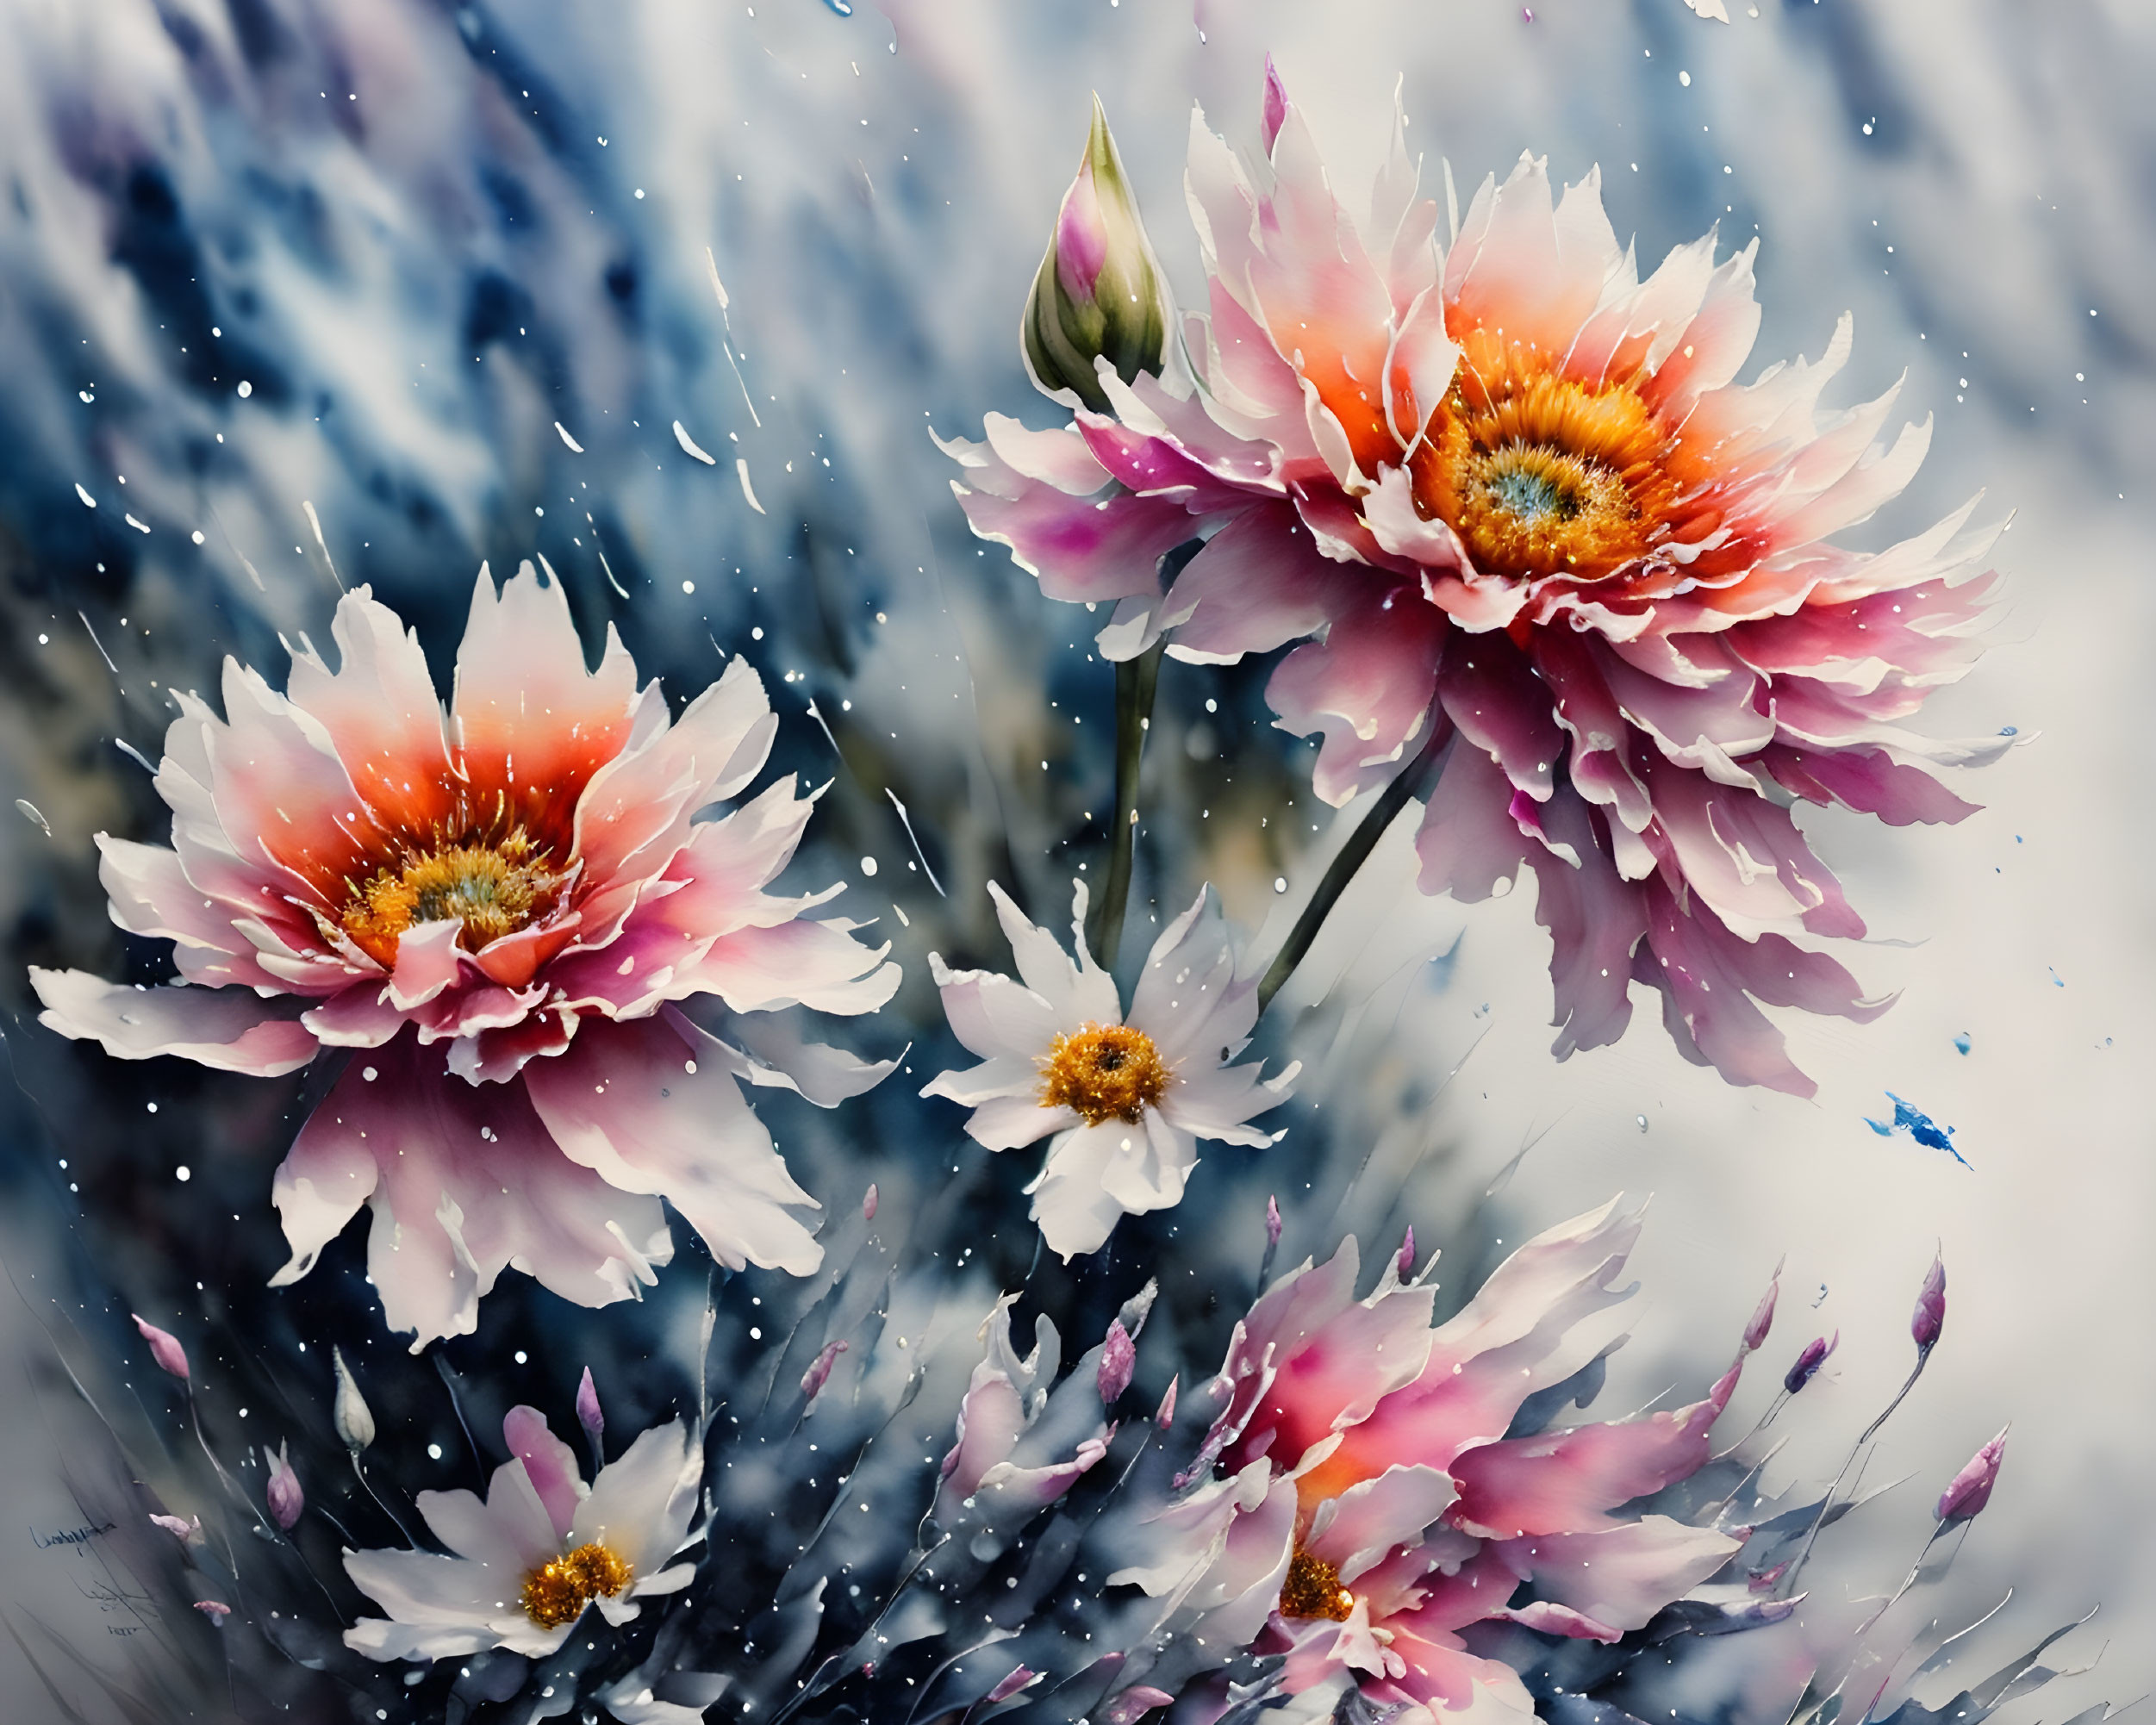 Winter Blooms: A Dreamy Peony Painting